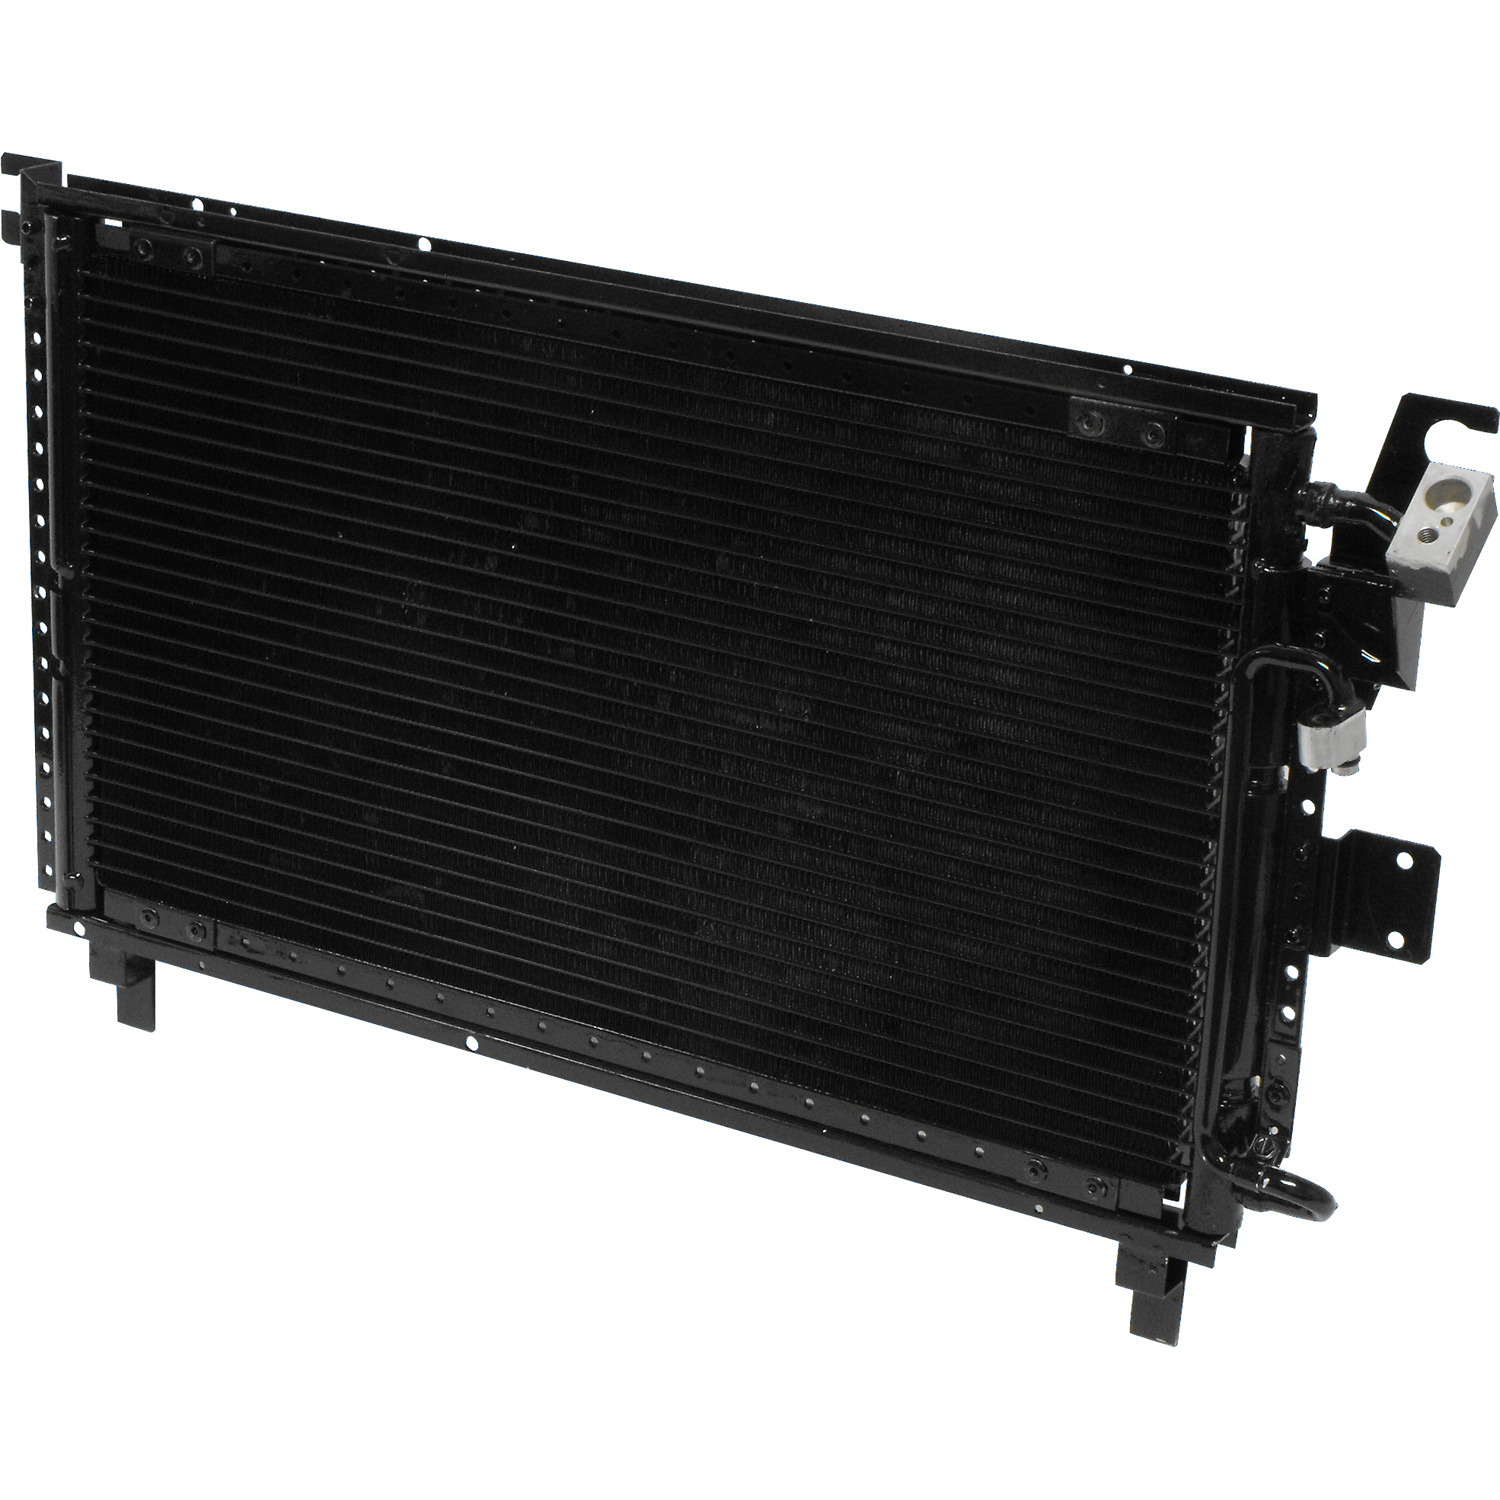 TCW Condenser 44-3041 New Product Image field_60b6a13a6e67c